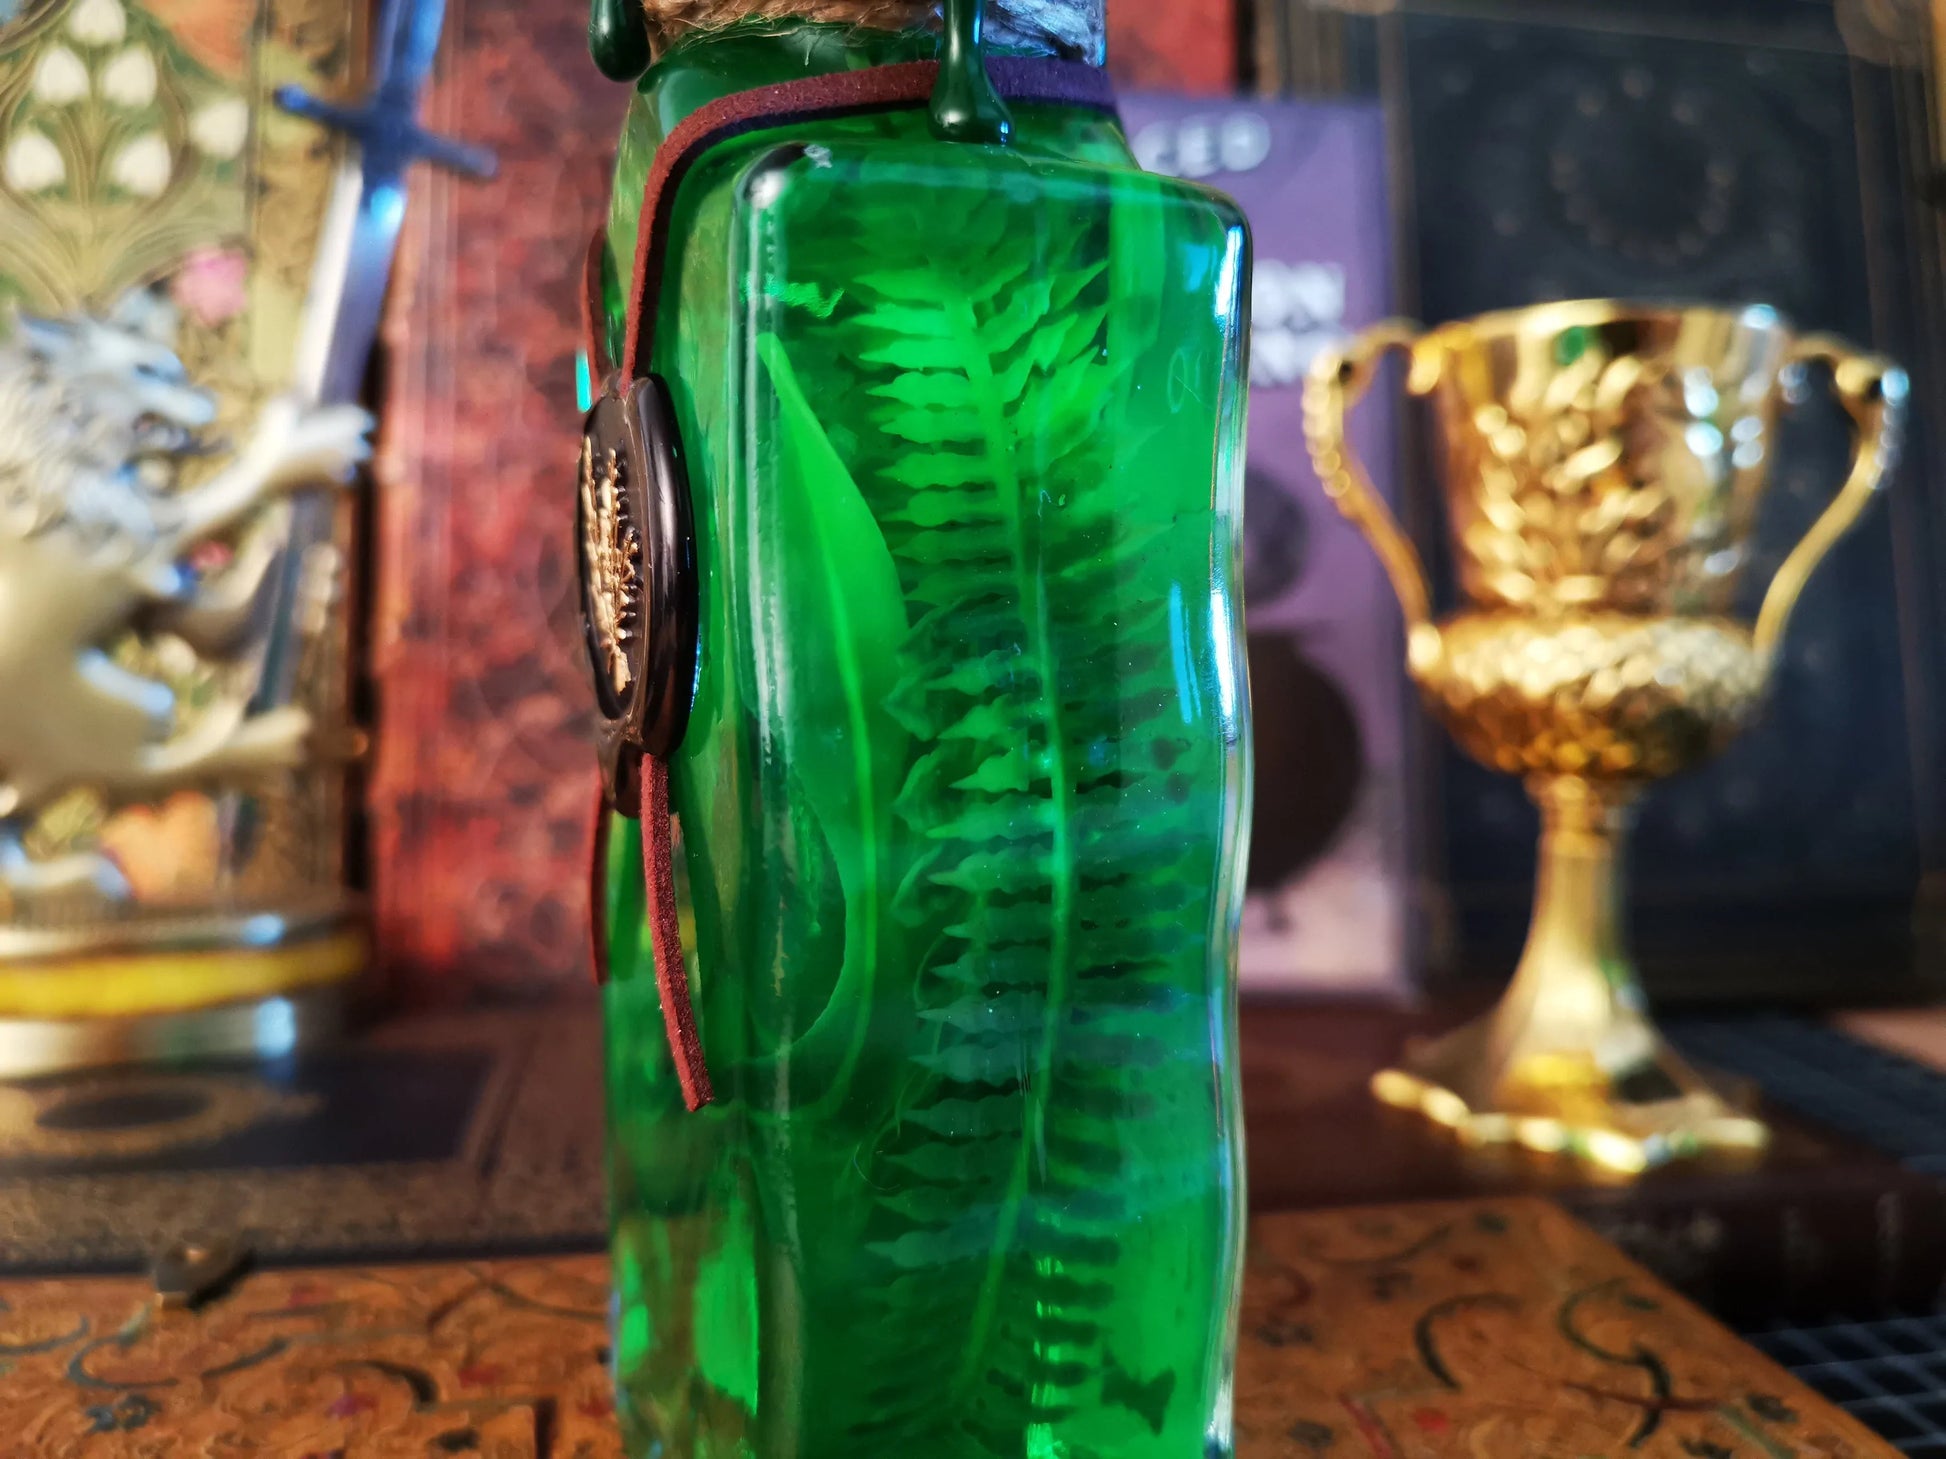 Gillyweed - Branchiflore Aravis Potions Apothecary Harry Potter